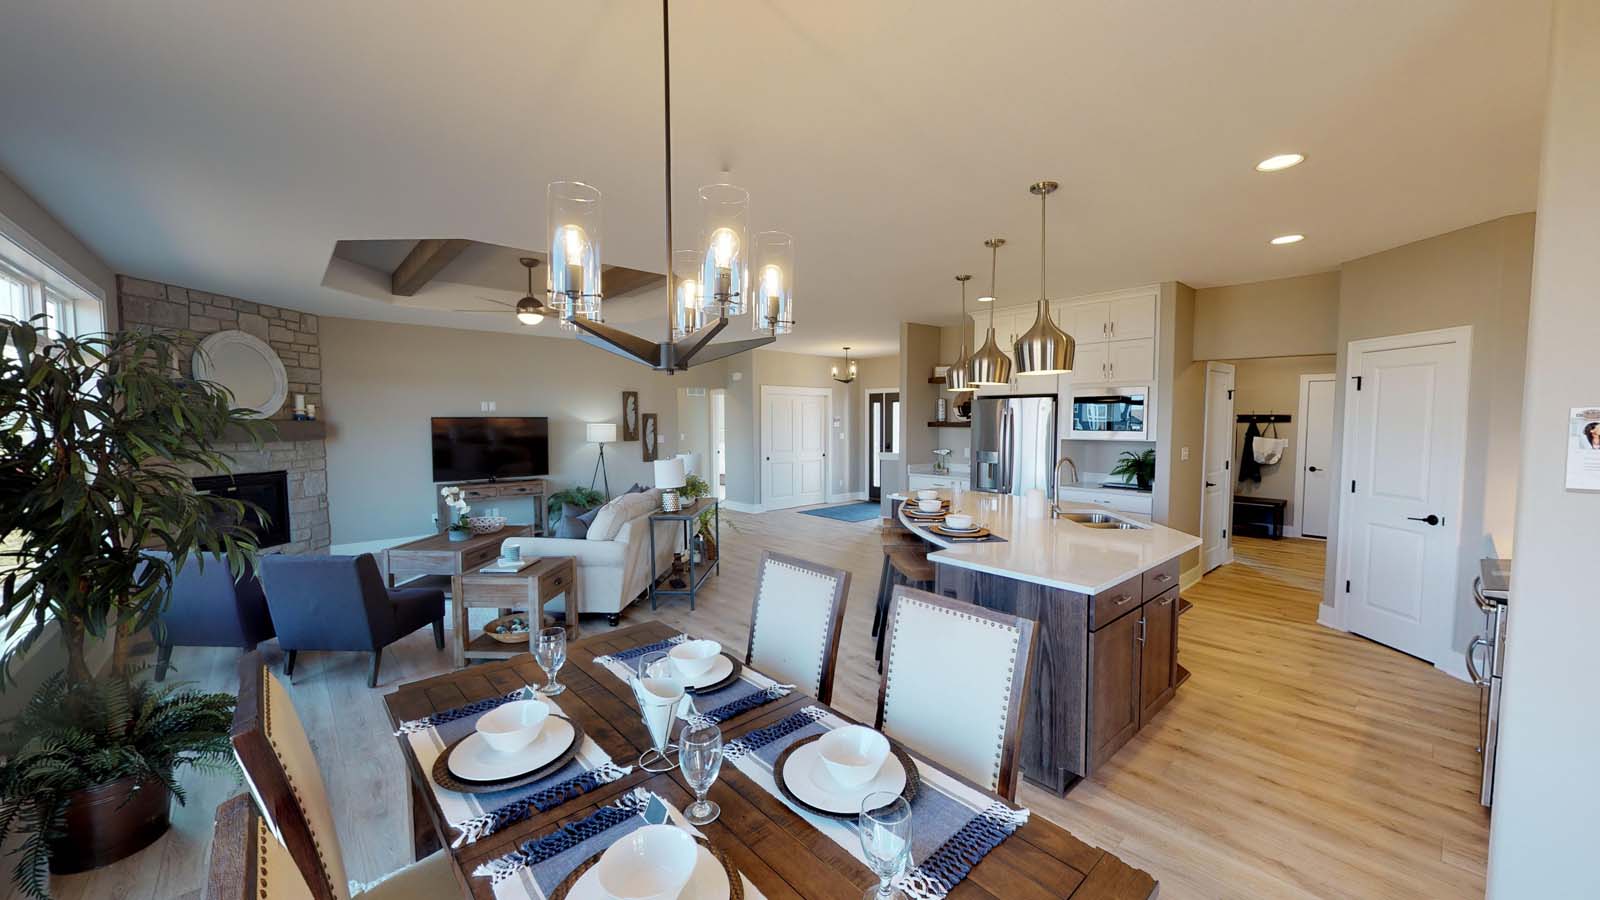 The Hadley model home dining room/kitchen/family room